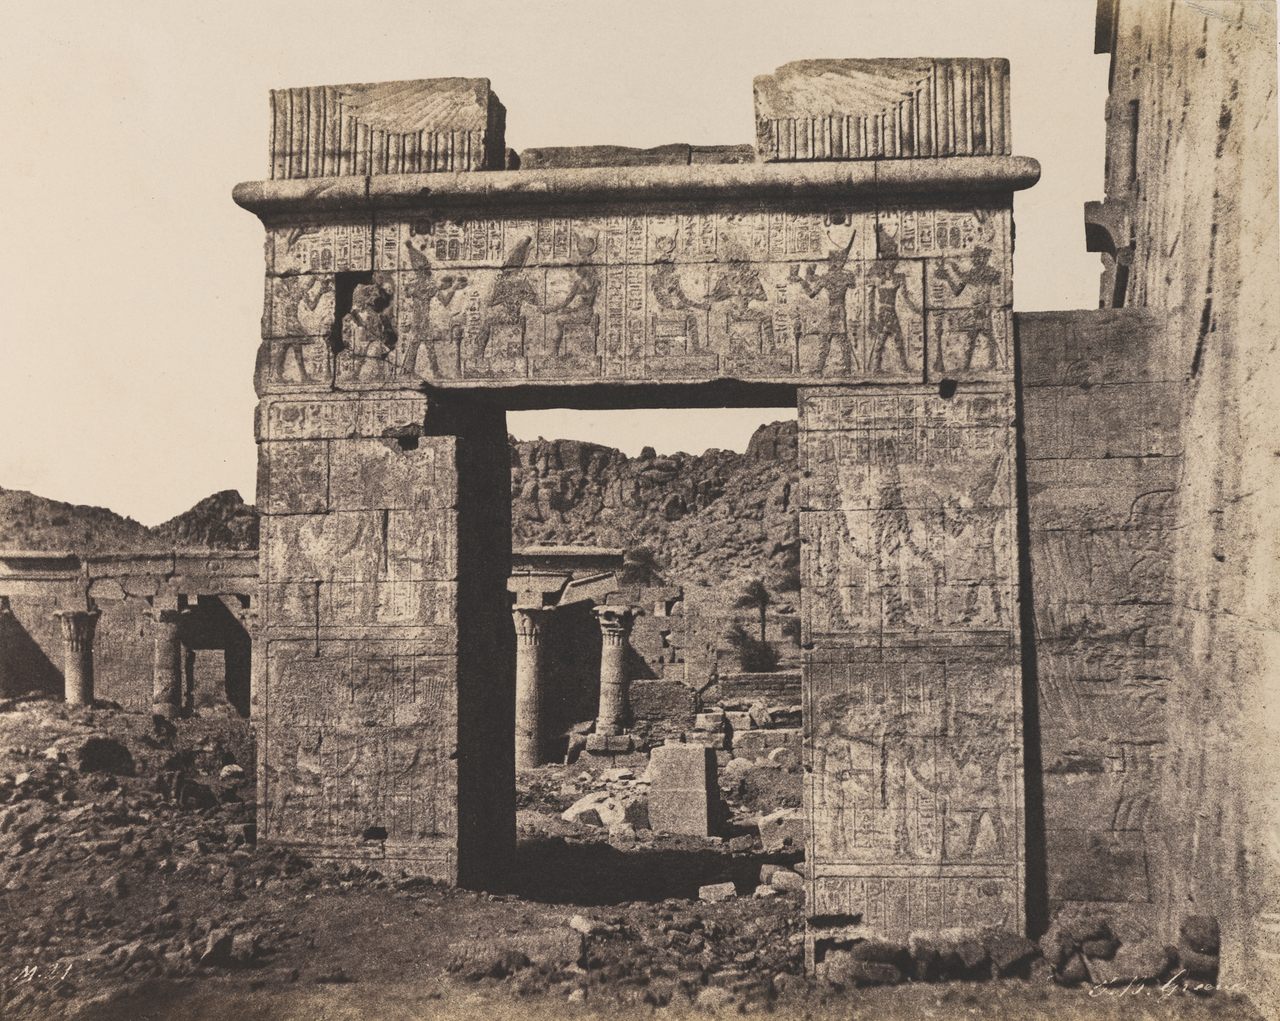 Greene photographed the temple complex on the island of Philae in 1854. More than a century later, it was moved to higher ground when dams led to flooding.